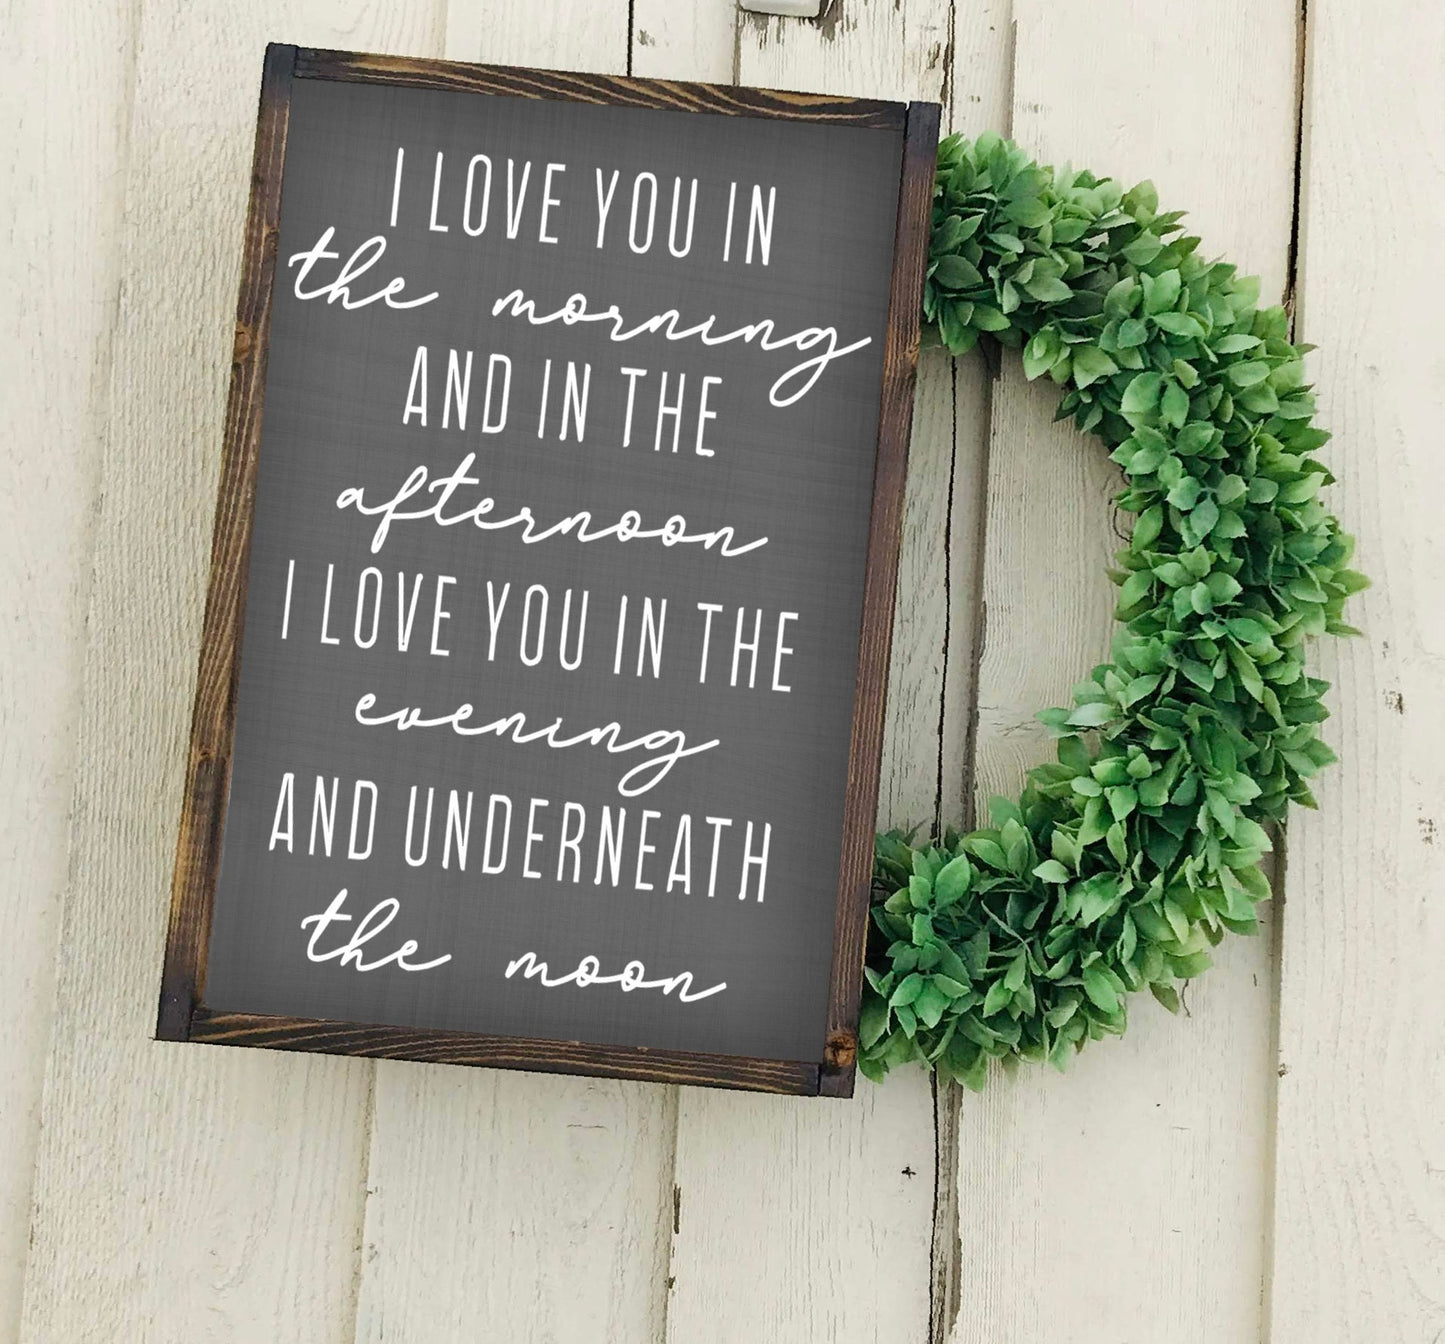 I love you in the morning and in the afternoon | Wood Sign | Framed Wood Sign | Wood and Canvas Sign | Canvas Art | Farmhouse Decor